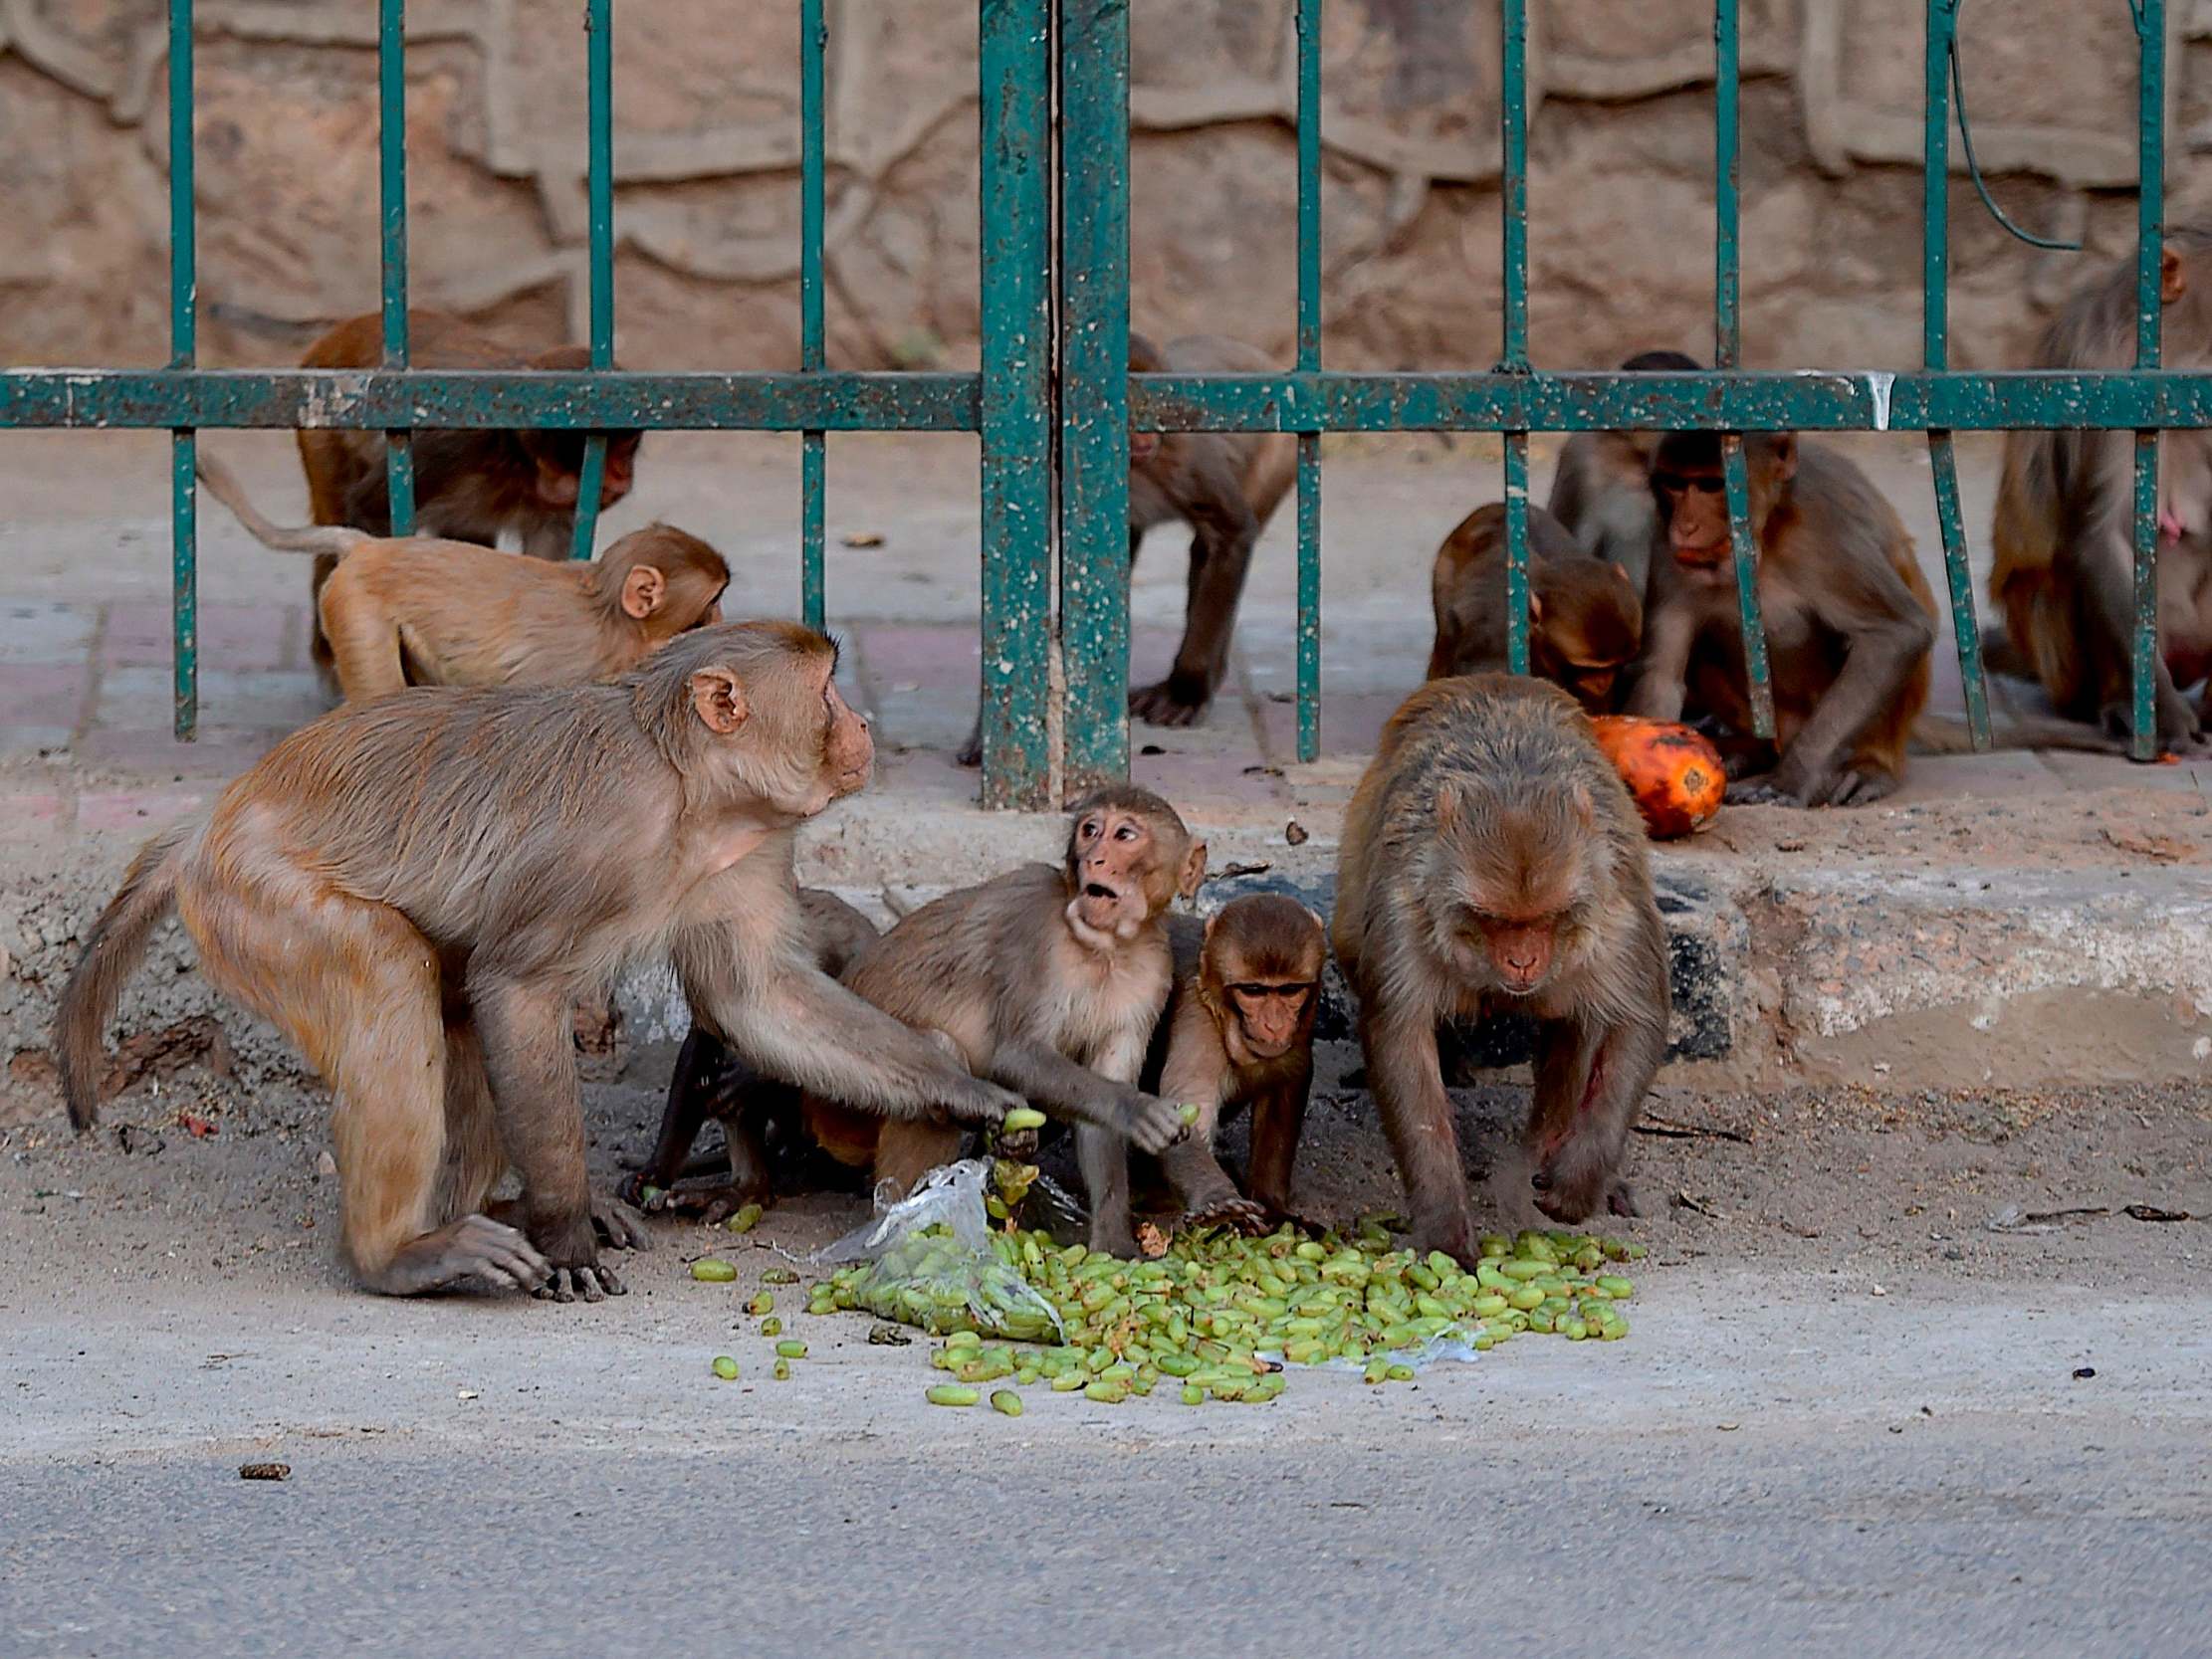 File image from 10 April 2020 of monkeys eating fruit on a street during a government-imposed nationwide lockdown as a preventive measure against the Covid-19 coronavirus in New Delhi, India.